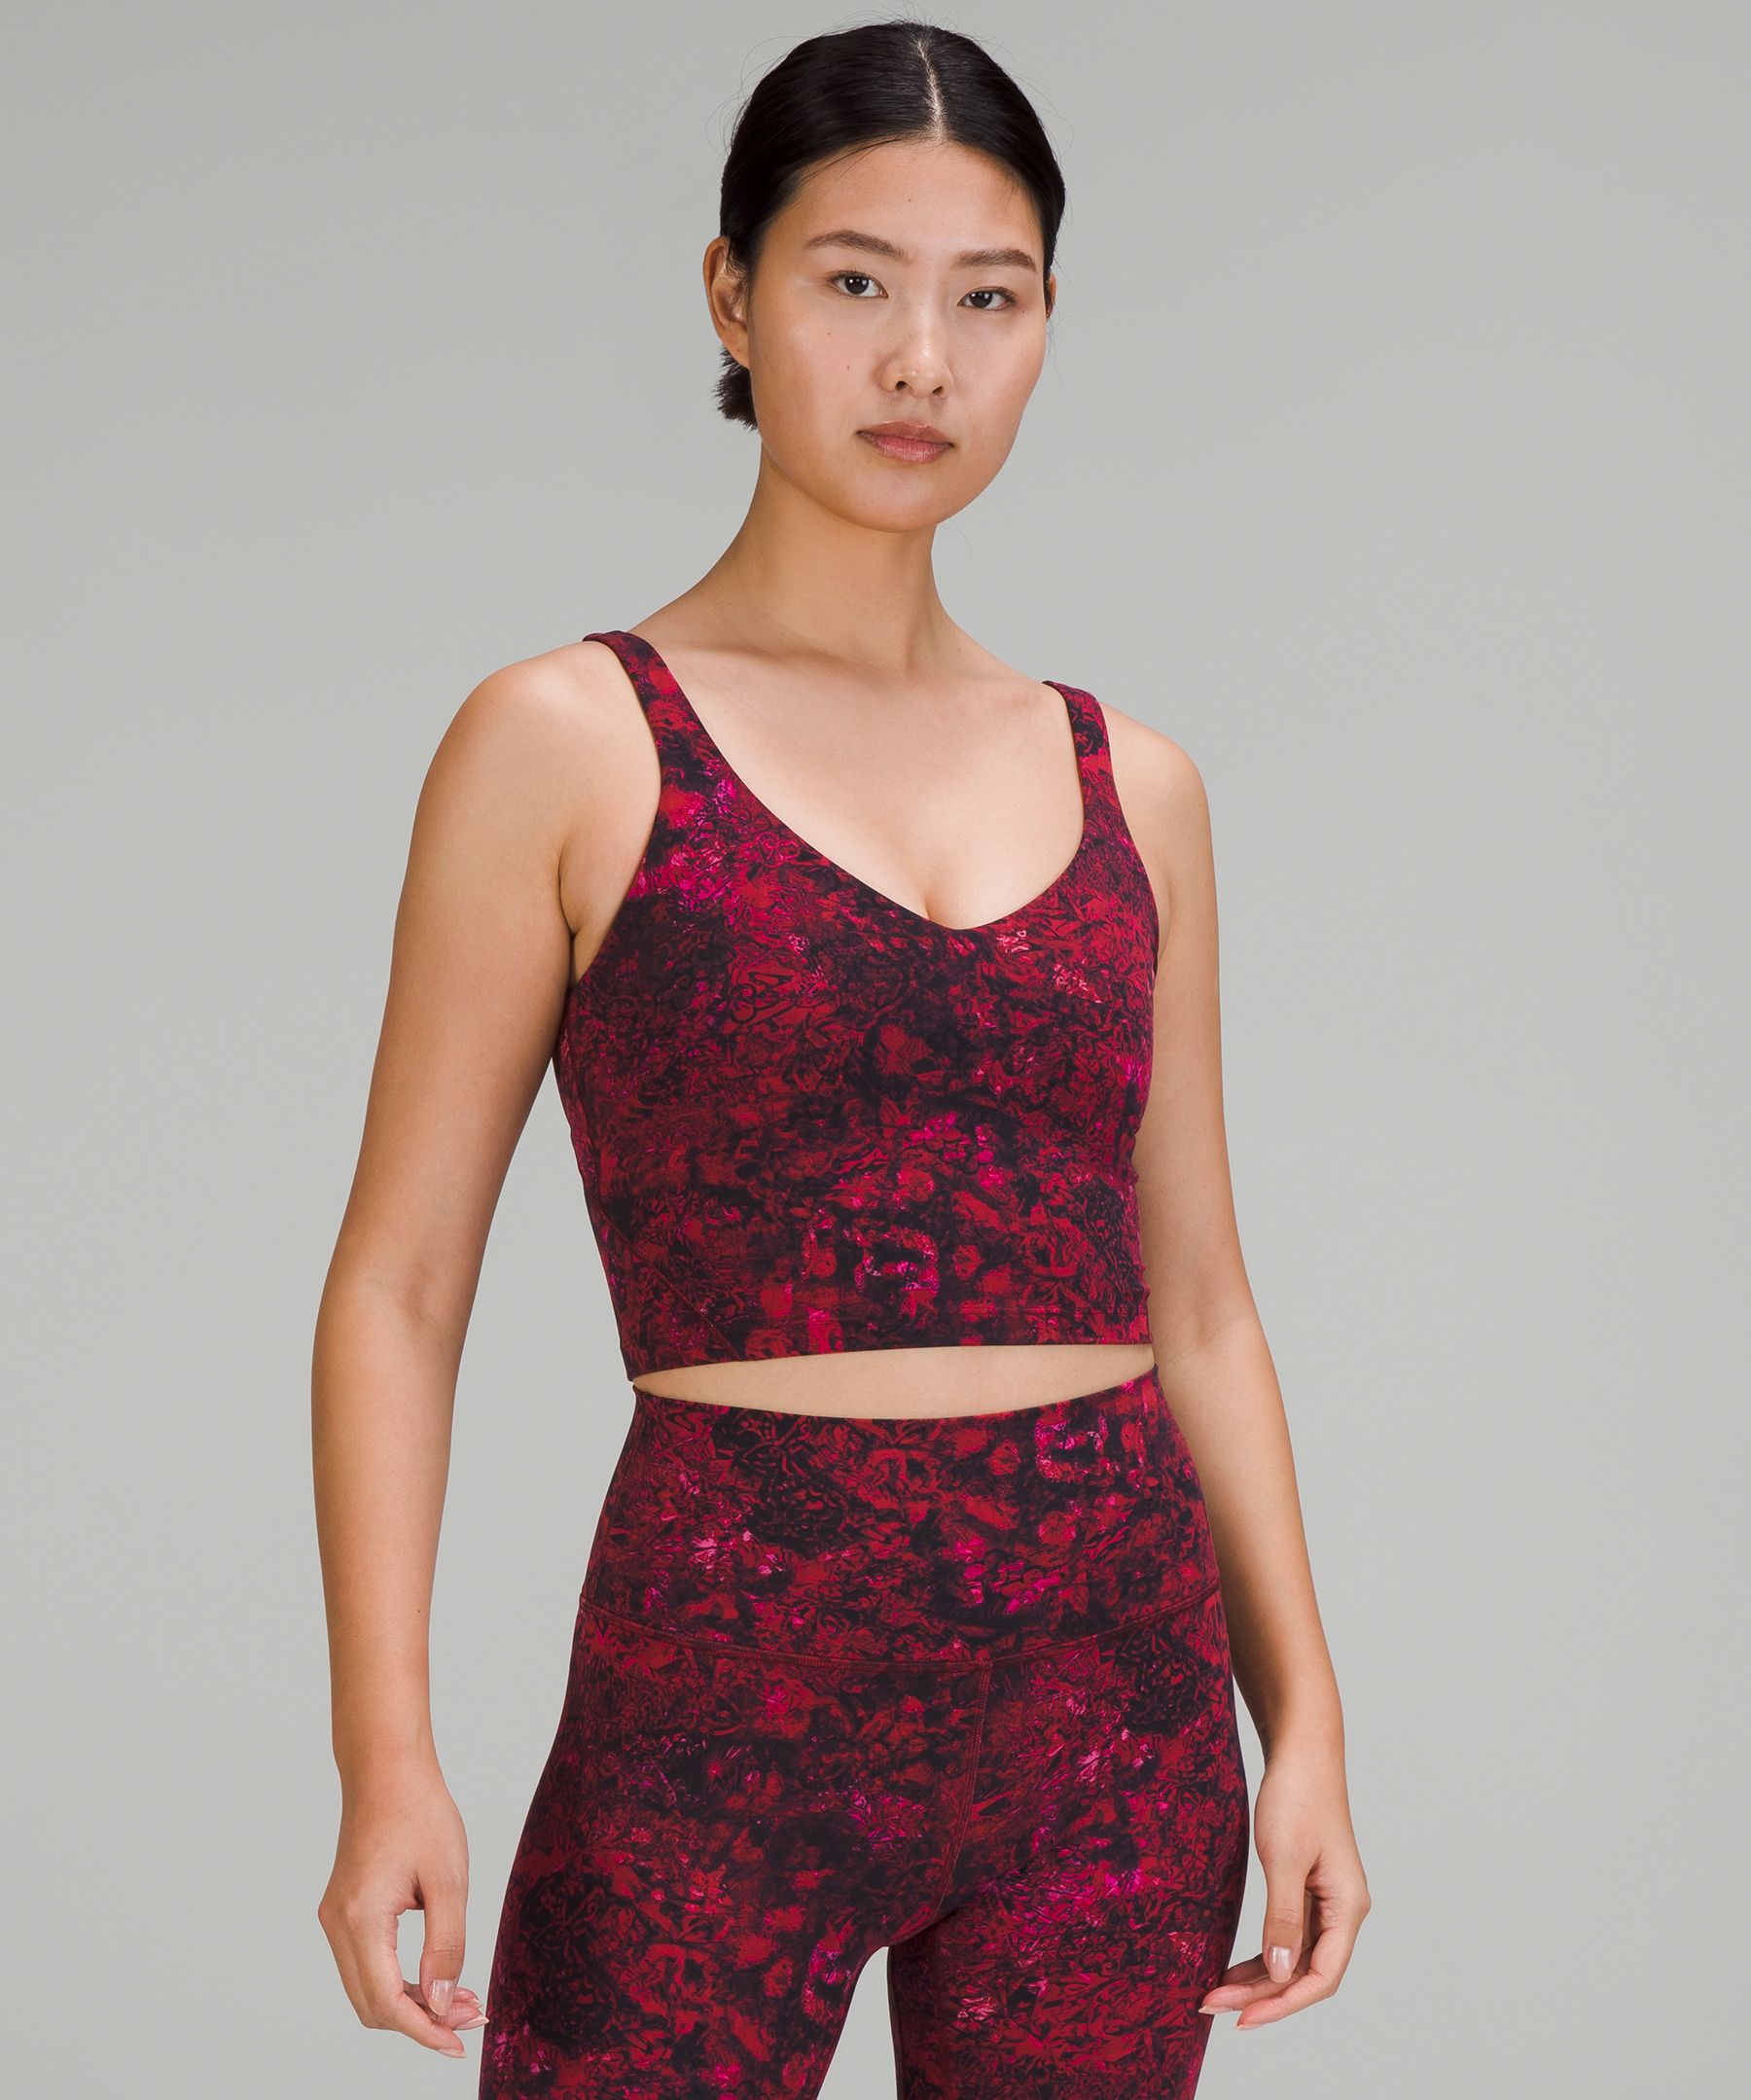 NWT Lululemon Lunar New Year Align Cropped Tank Top Dark Red Gold Size 4